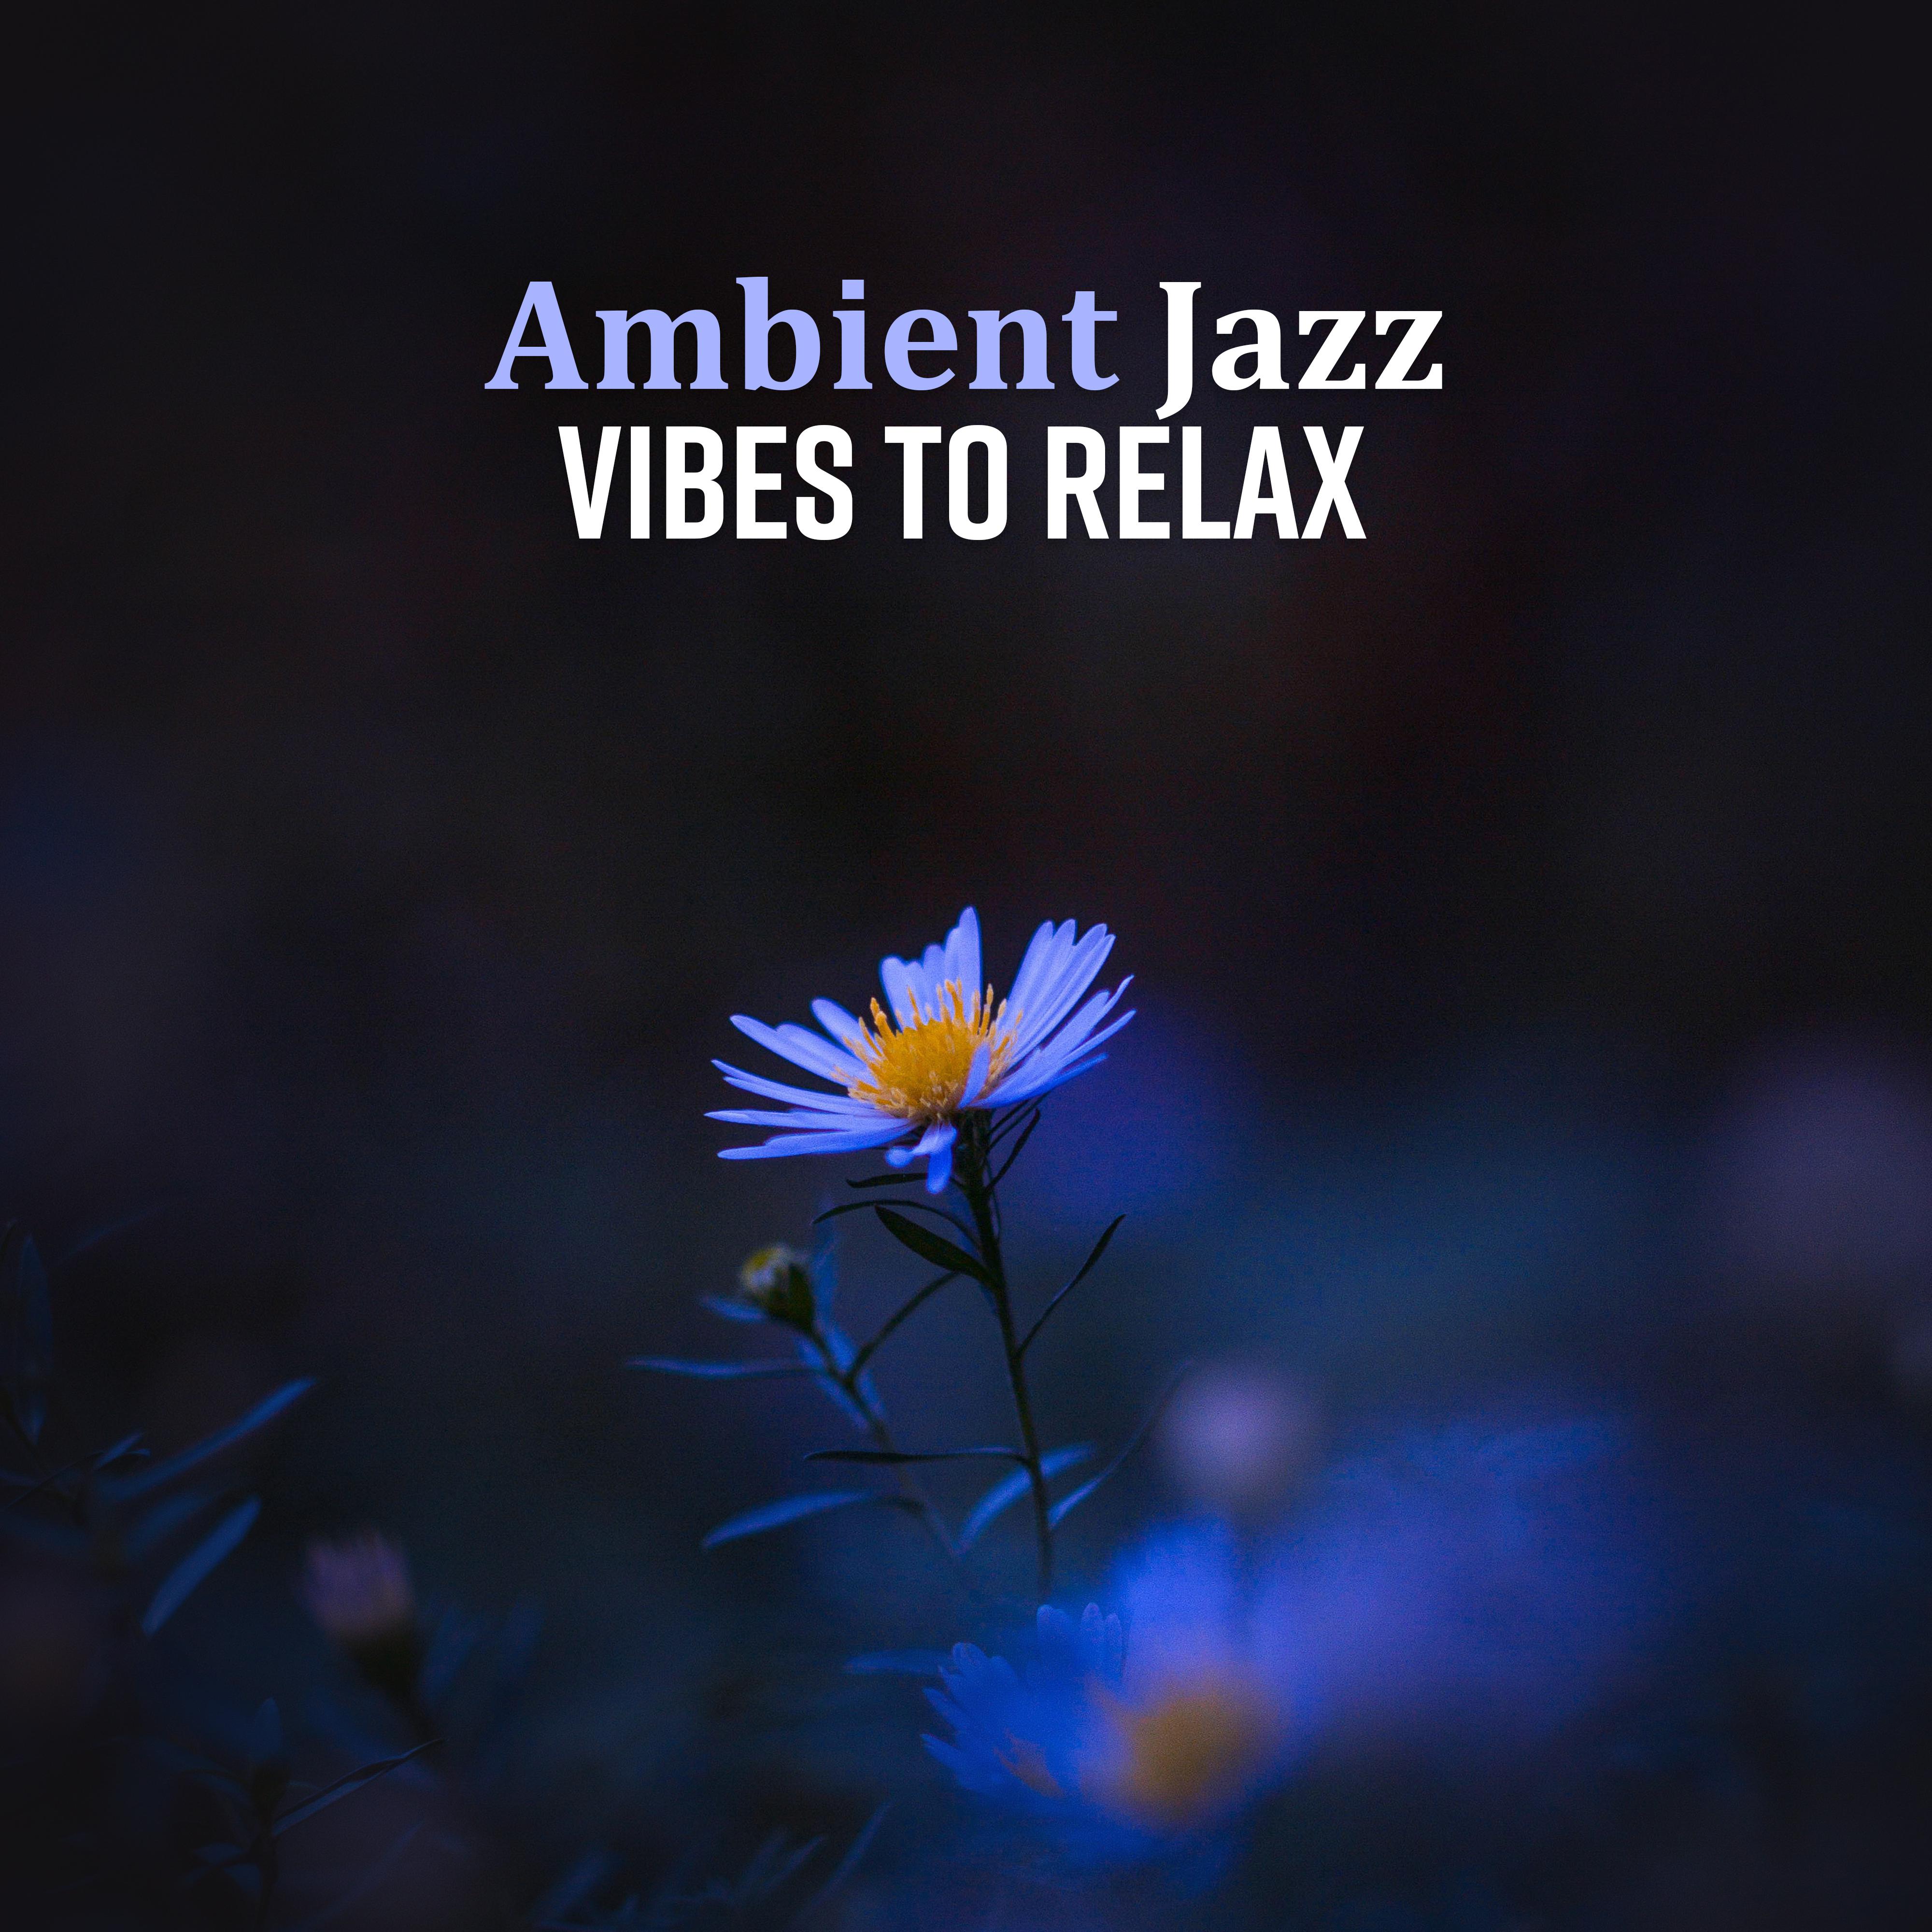 Ambient Jazz Vibes to Relax